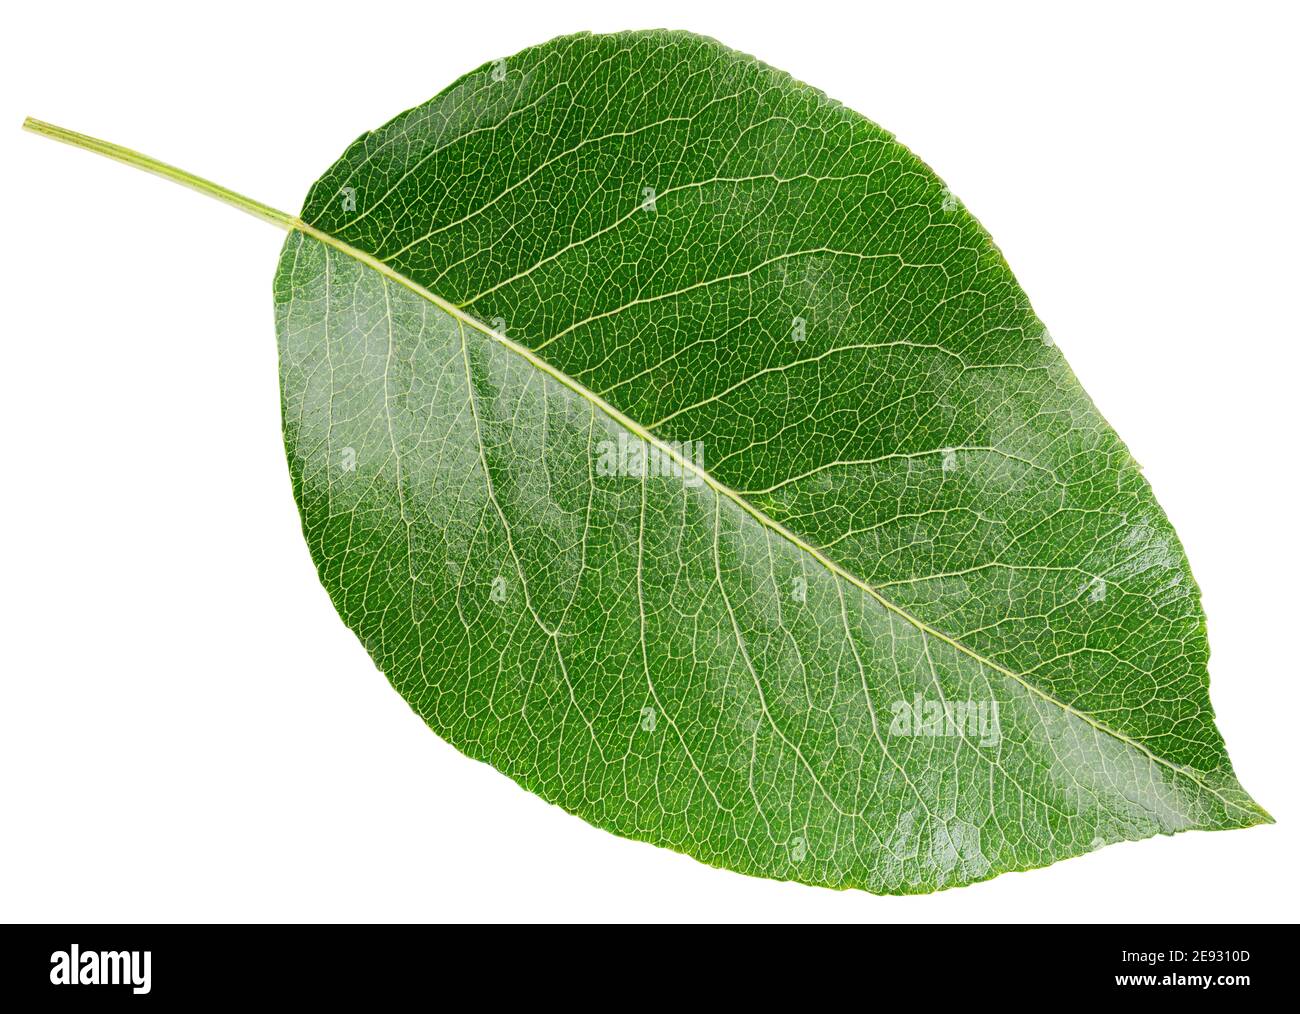 Pear green leaf isolated on white background with clipping path Stock Photo